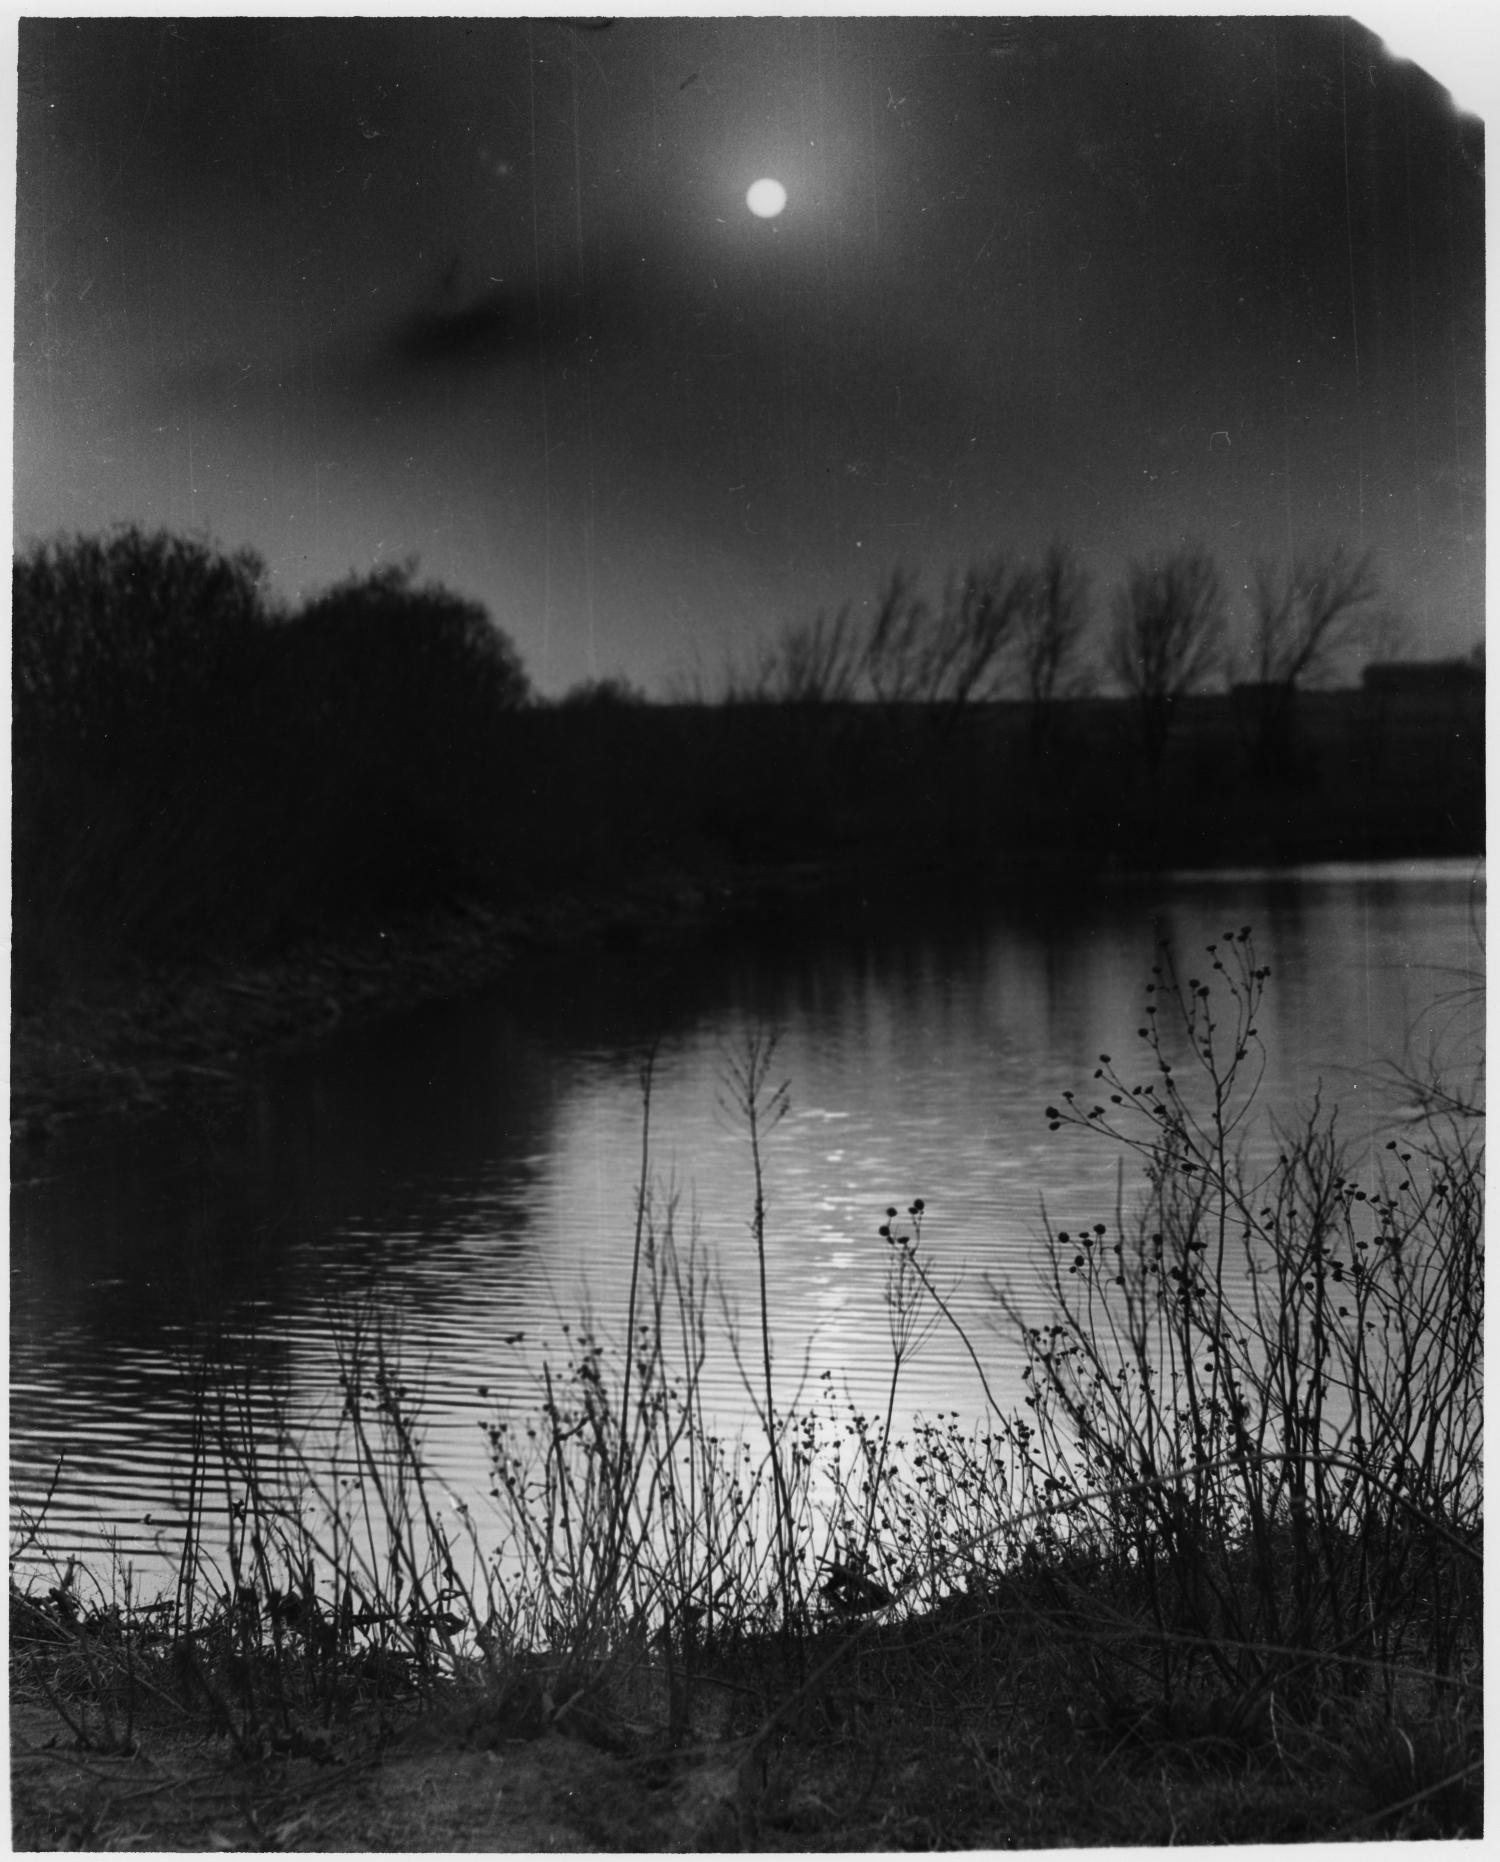 Albums 97+ Images the moon was shining on the lake at night Excellent